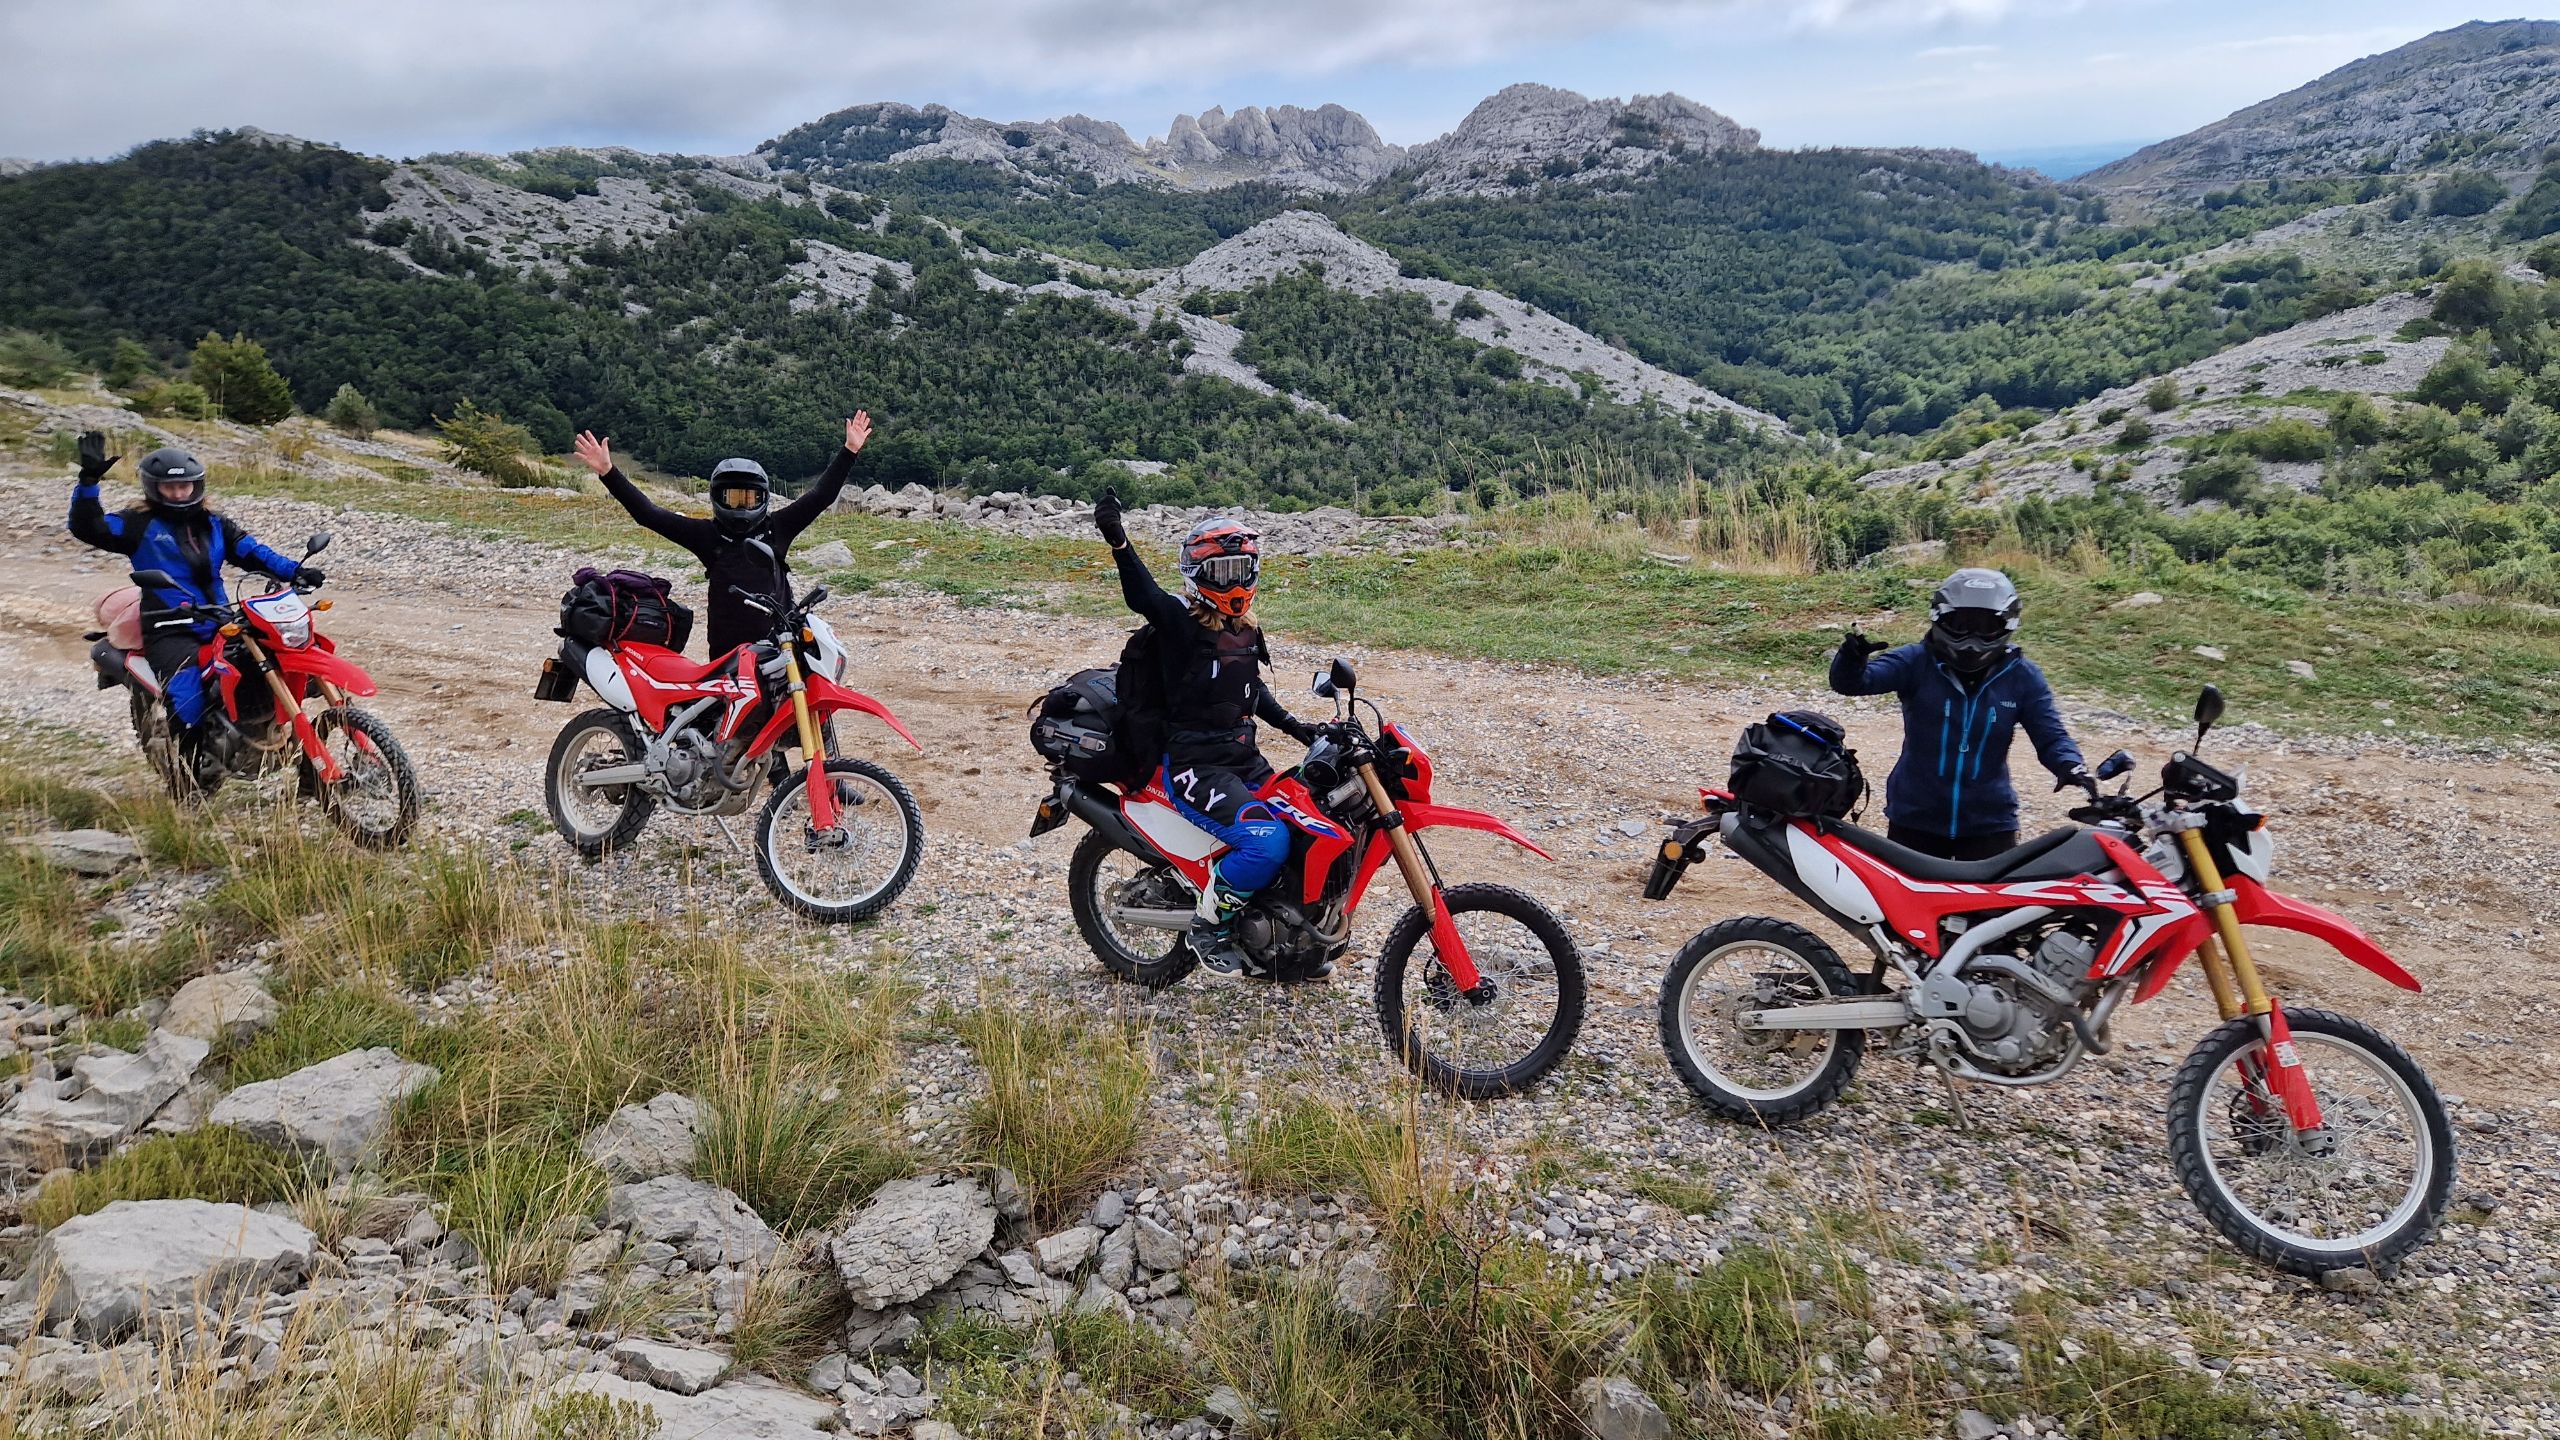 Funmoto ADVentures sightseeing 4 day only womens motorcycle tour in Croatia hi from Velebit mountain